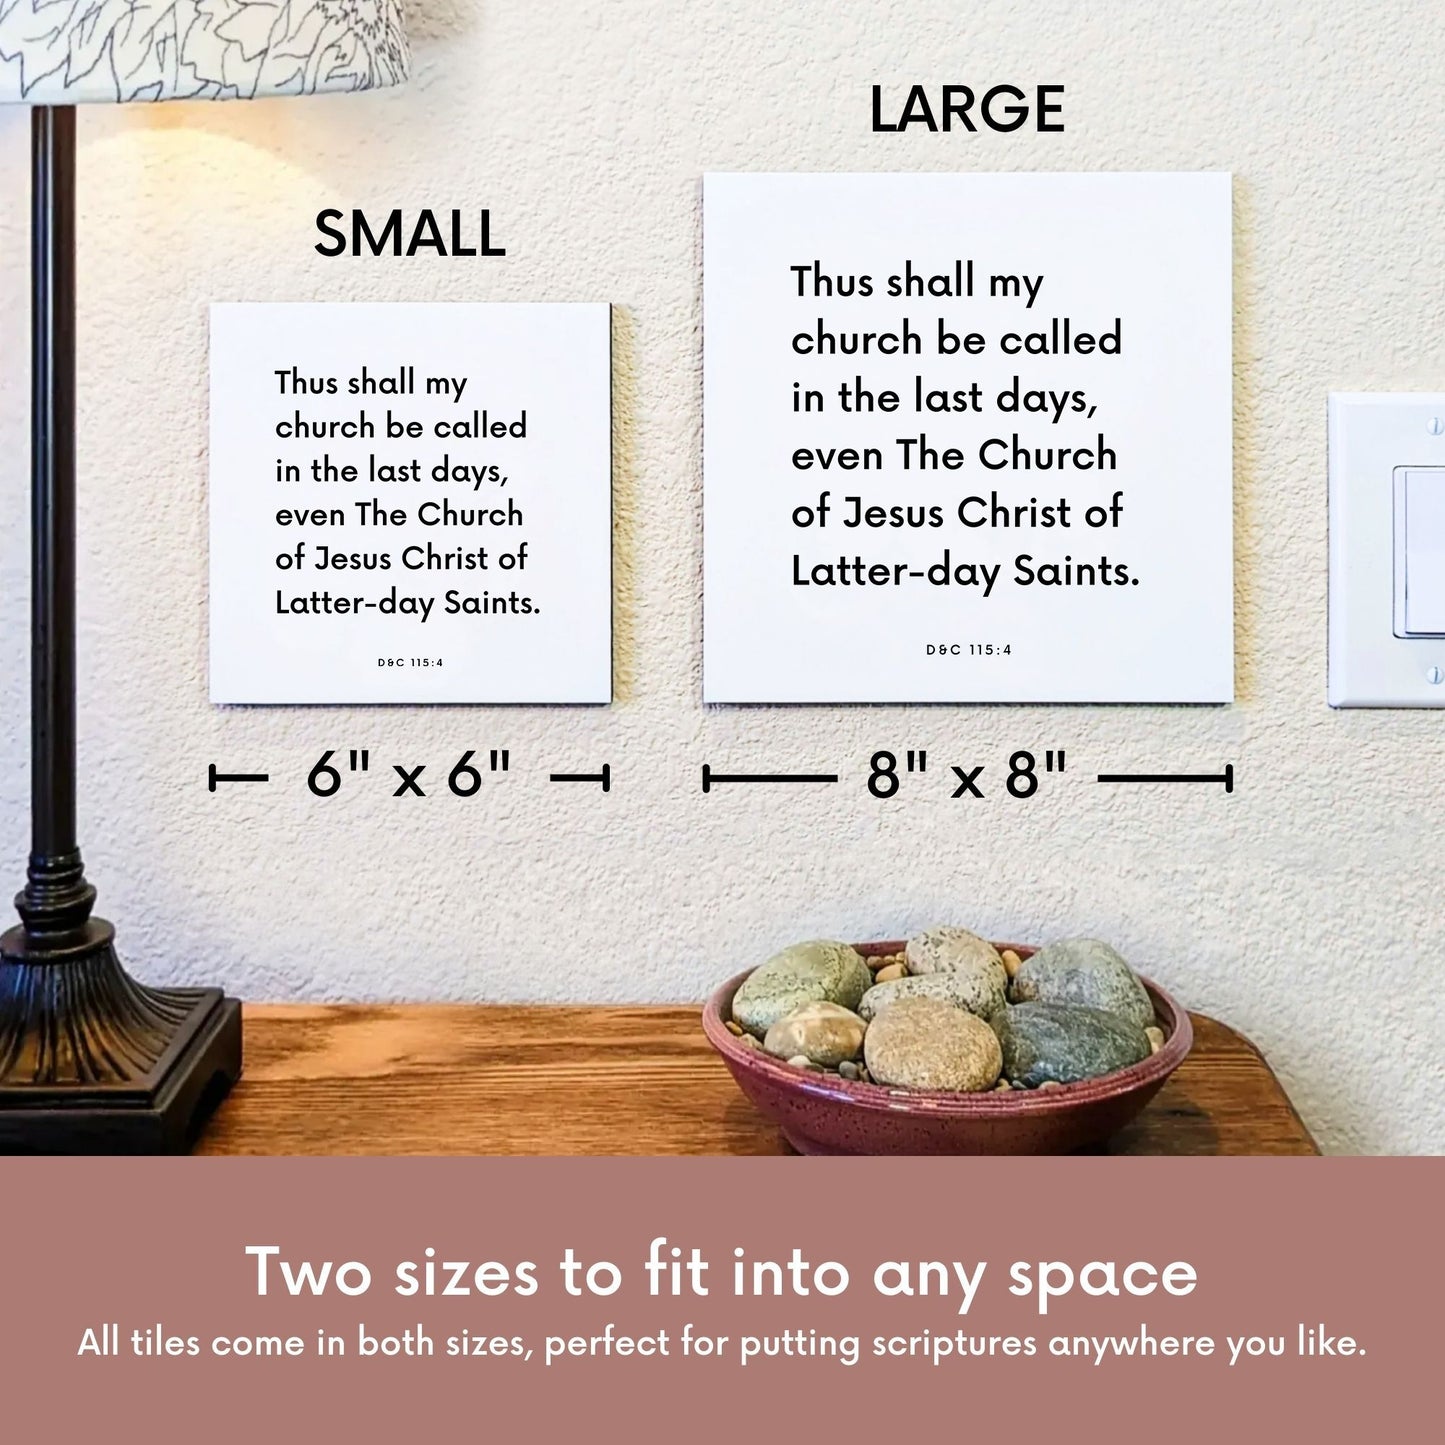 Scripture tile size comparison for D&C 115:4 - "Thus shall my church be called in the last days"